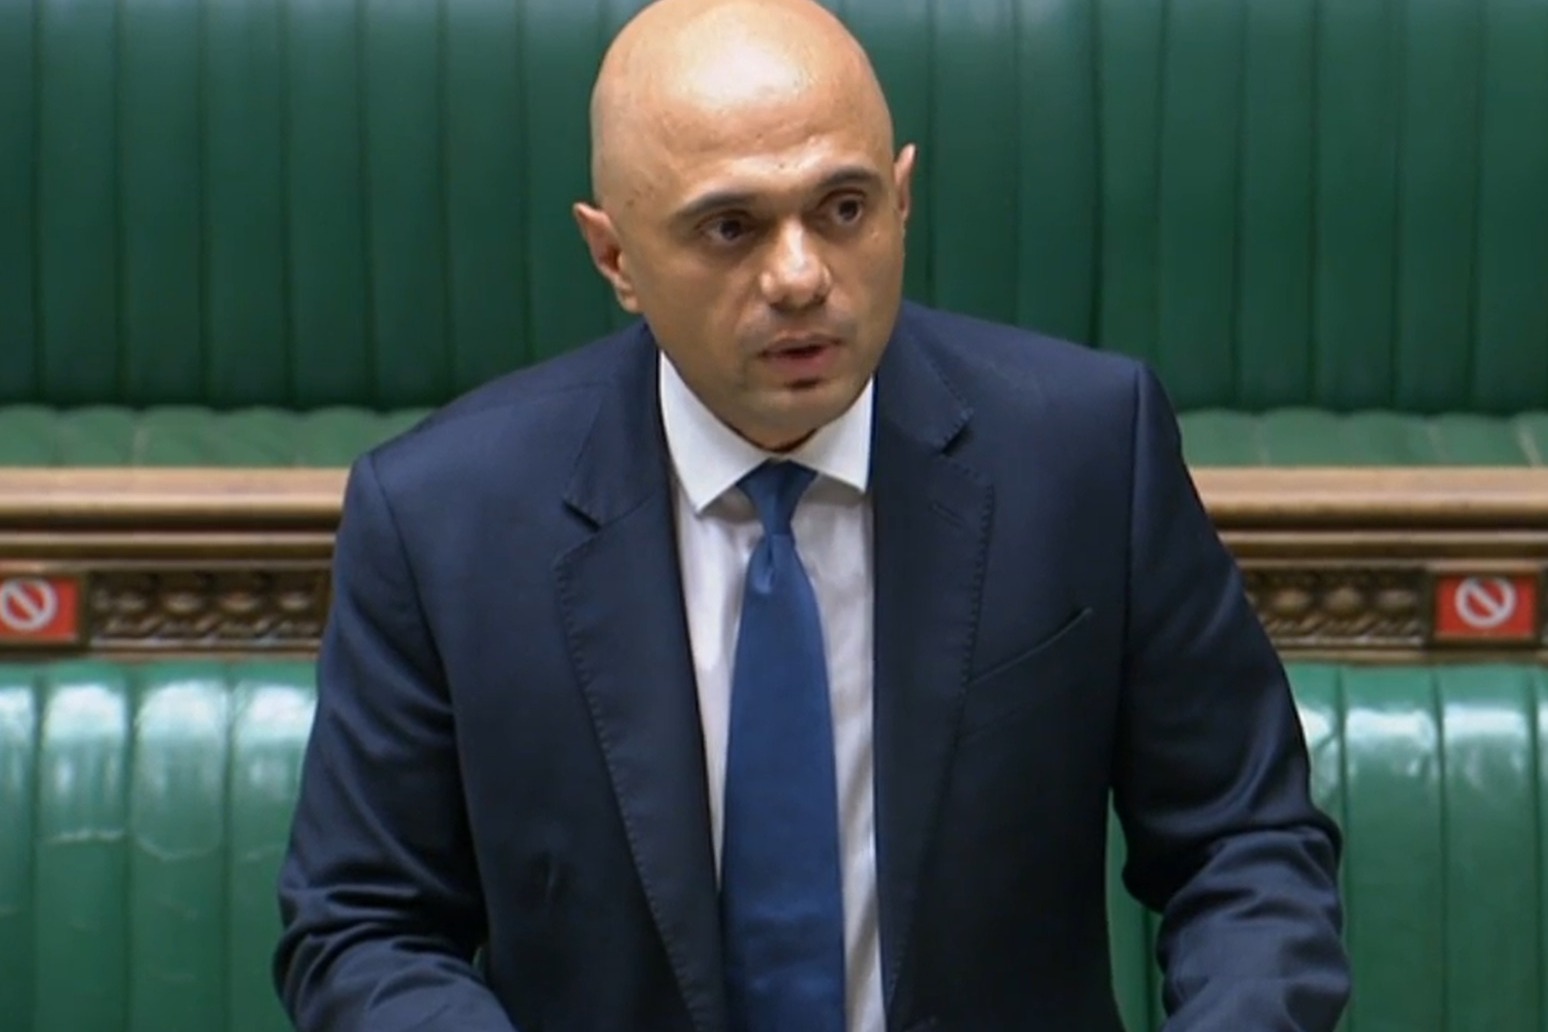 Sajid Javid criticised for suggesting people have ‘cowered’ from Covid-19. 